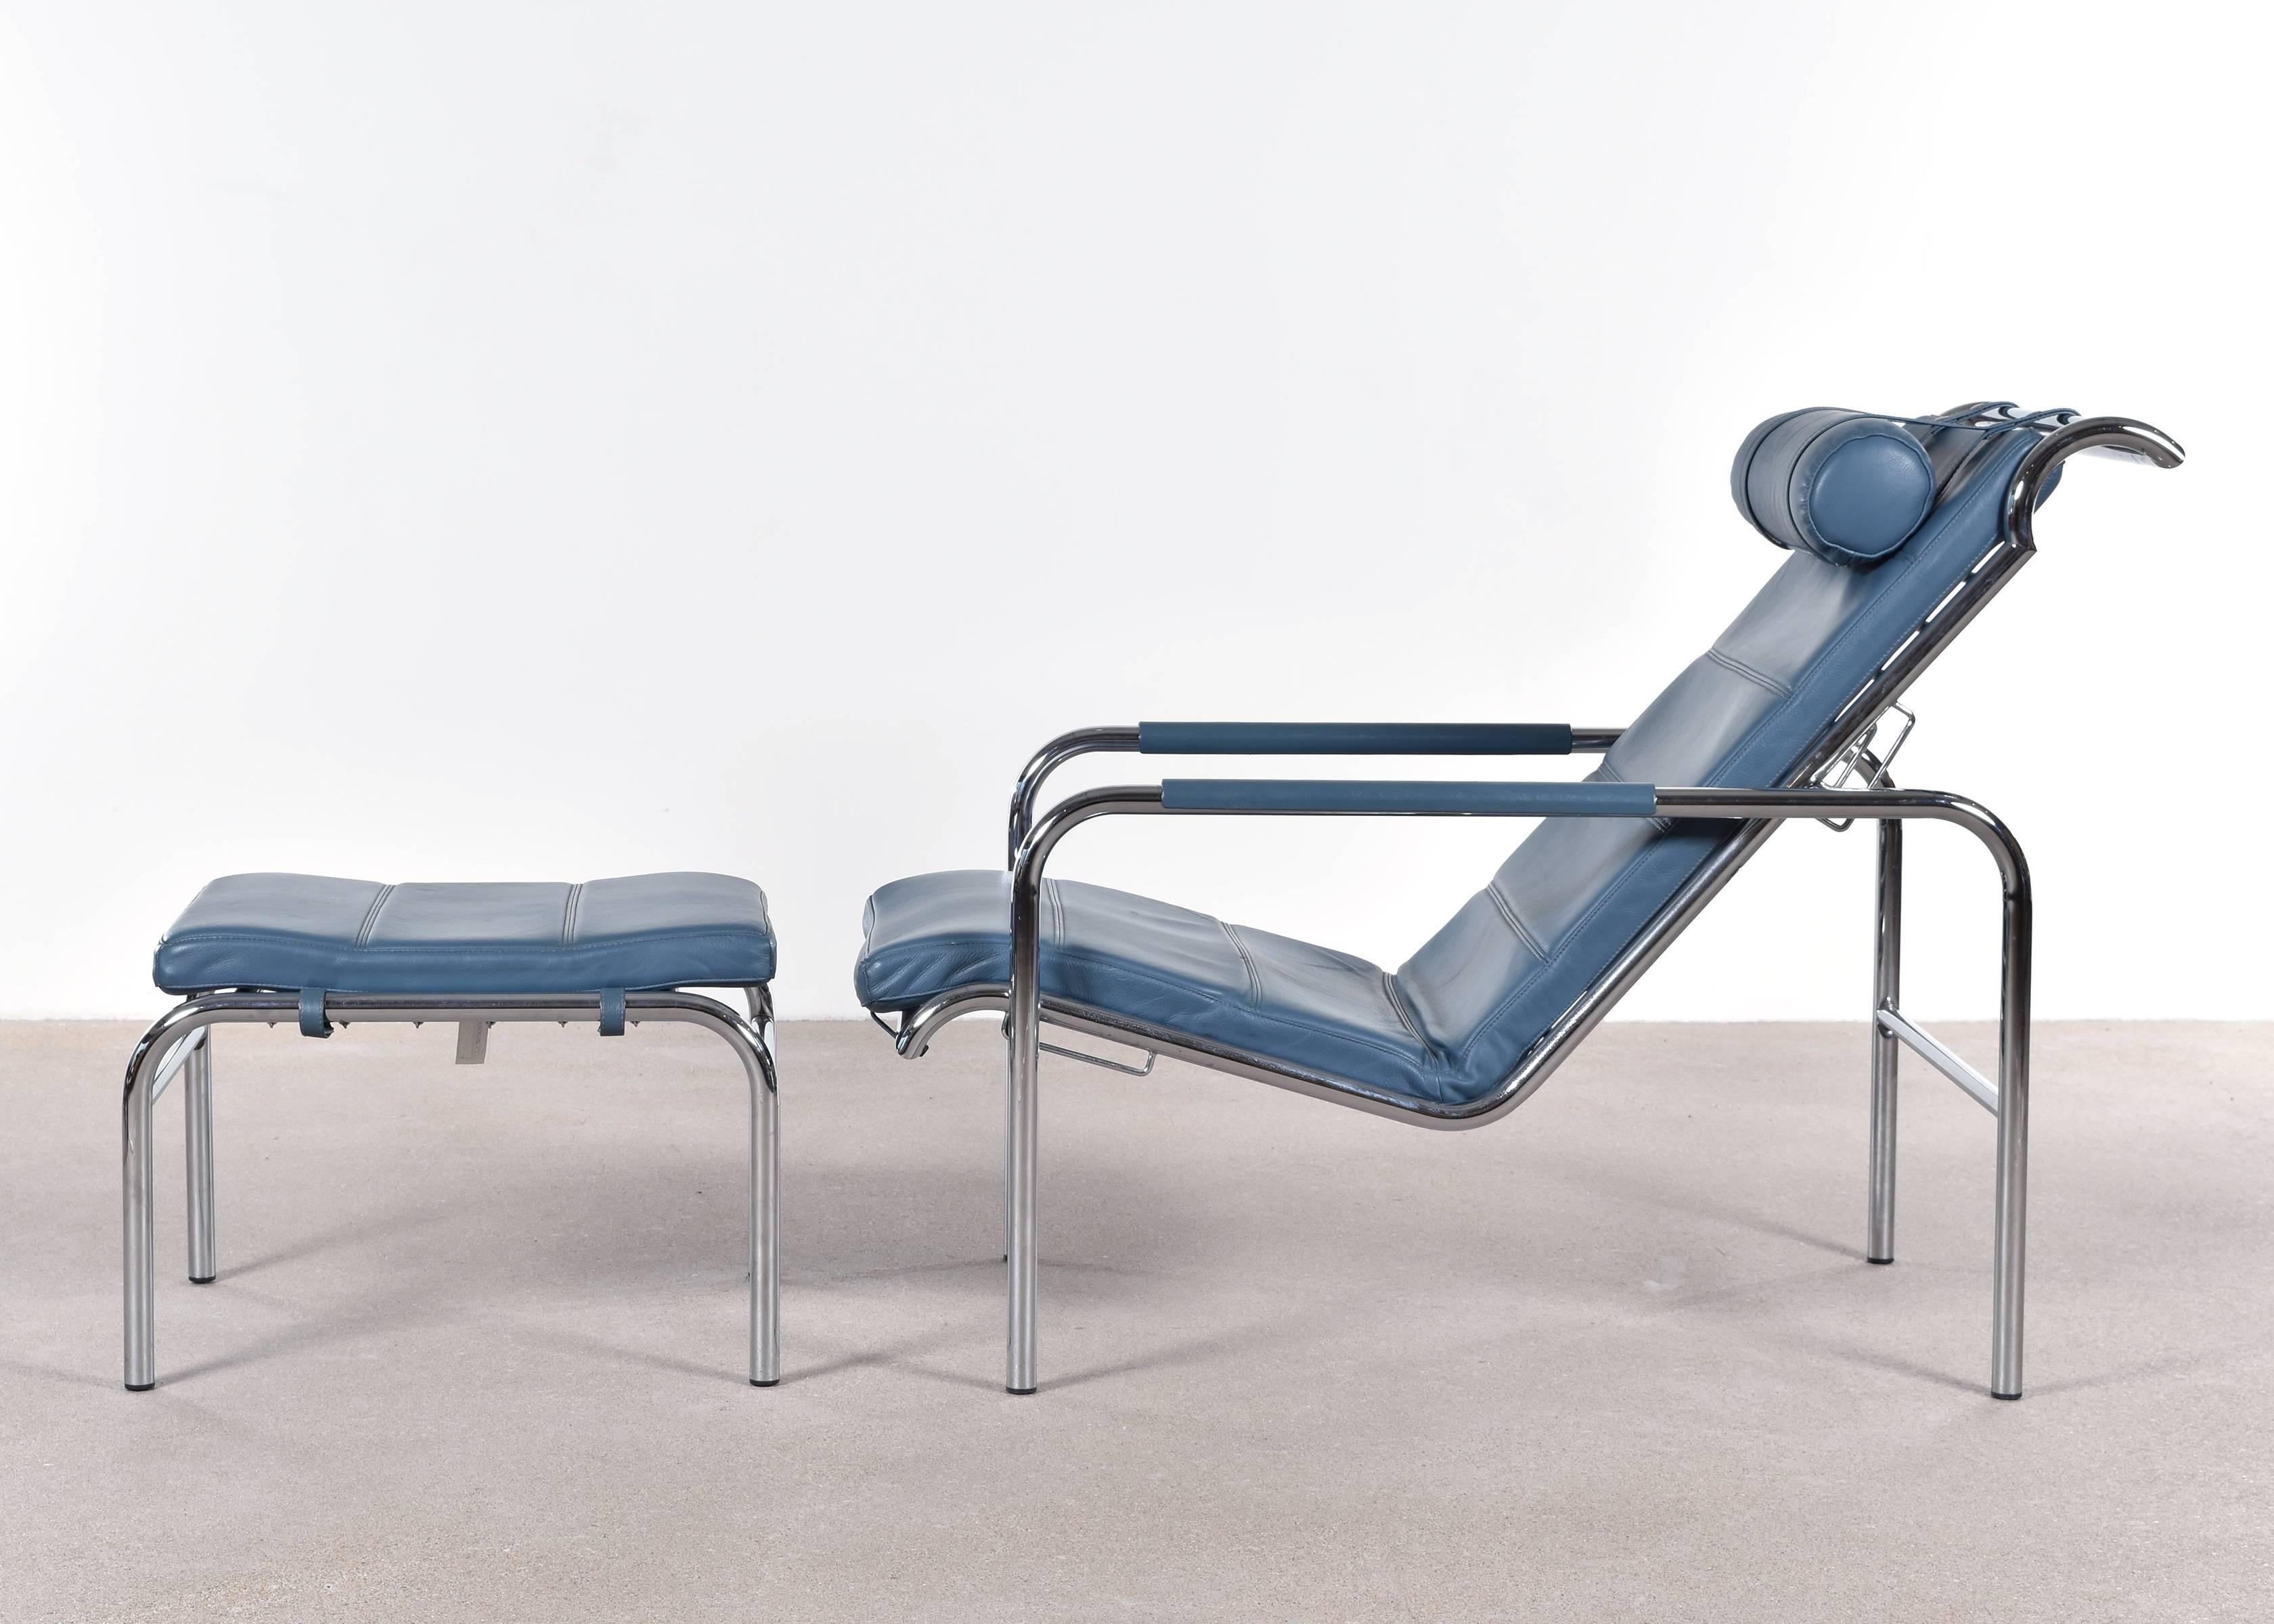 Genni chaise designed in 1935 by Gabriele Mucchi for Zanotta. Very comfortable lounge chair and ottoman with original petrol blue leather upholstery. Excellent vintage condition. Signed with manufacturer's label and serial number.

Free shipping